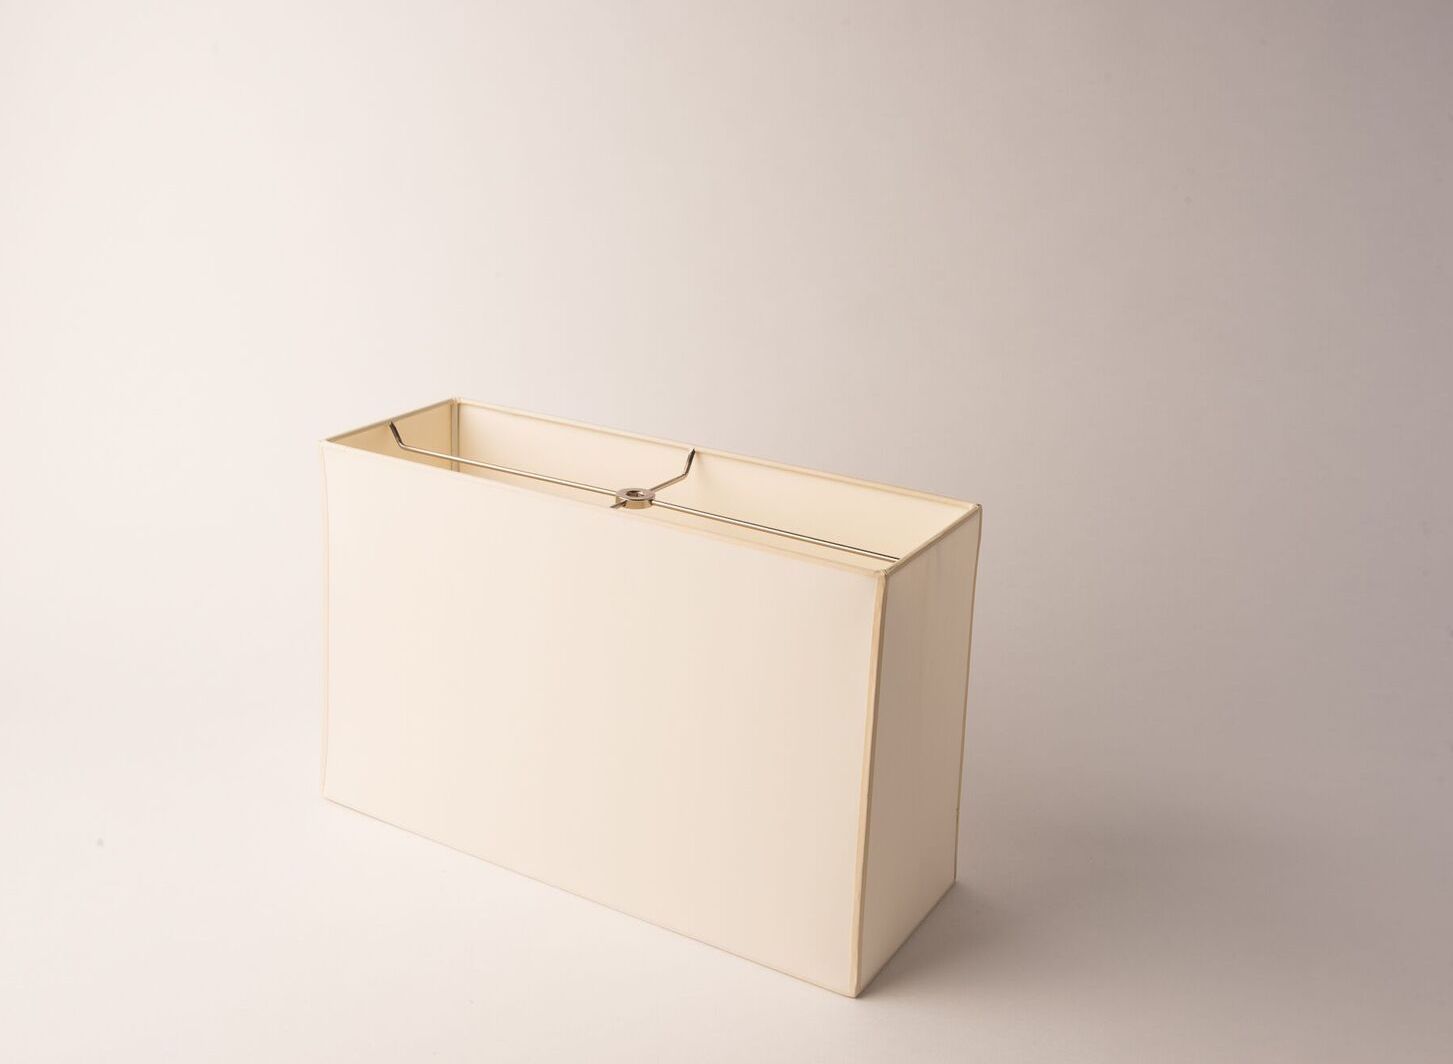 https://www.hotel-lamps.com/resources/assets/images/product_images/Rectangle Narrow Box Vellum Paper.jpeg